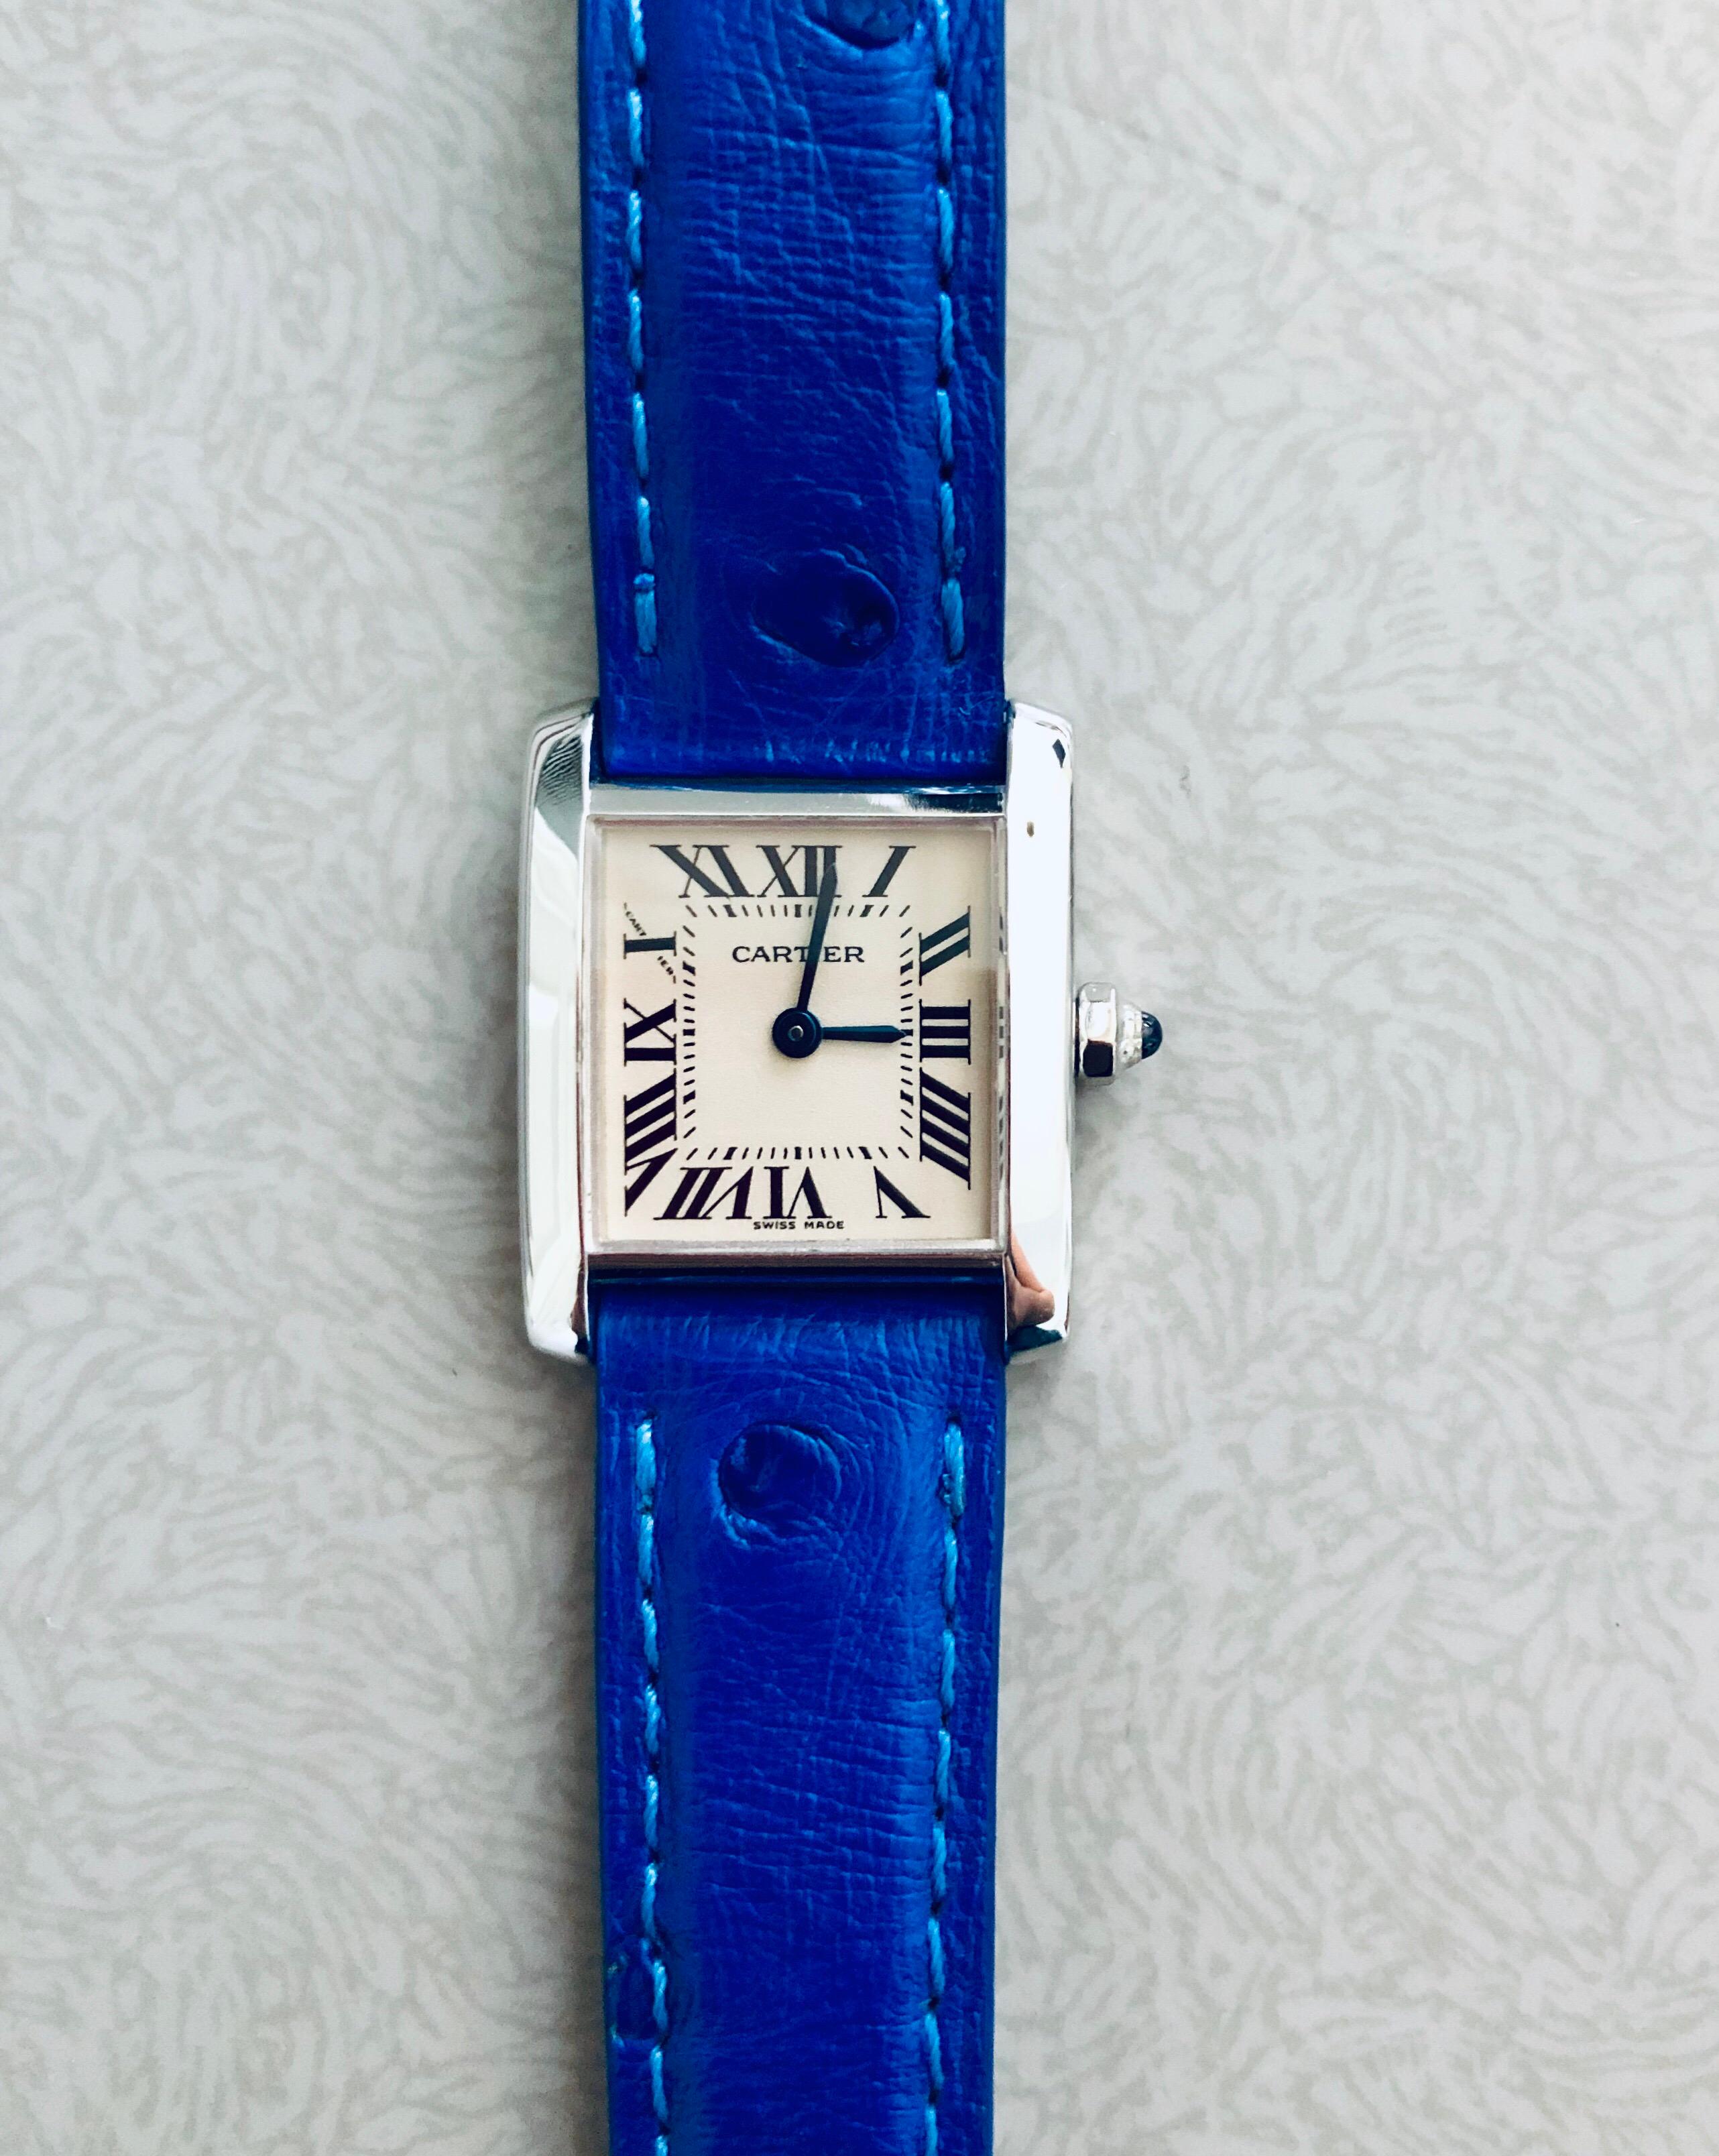 Cartier 18K White Gold Tank Francaise. Only one owner, watch purchased in 2001 directly through Cartier. Completely serviced recently with stunning new cobalt blue Ostrich band. 18k white gold case dimensions are 20 mm by 25 mm.